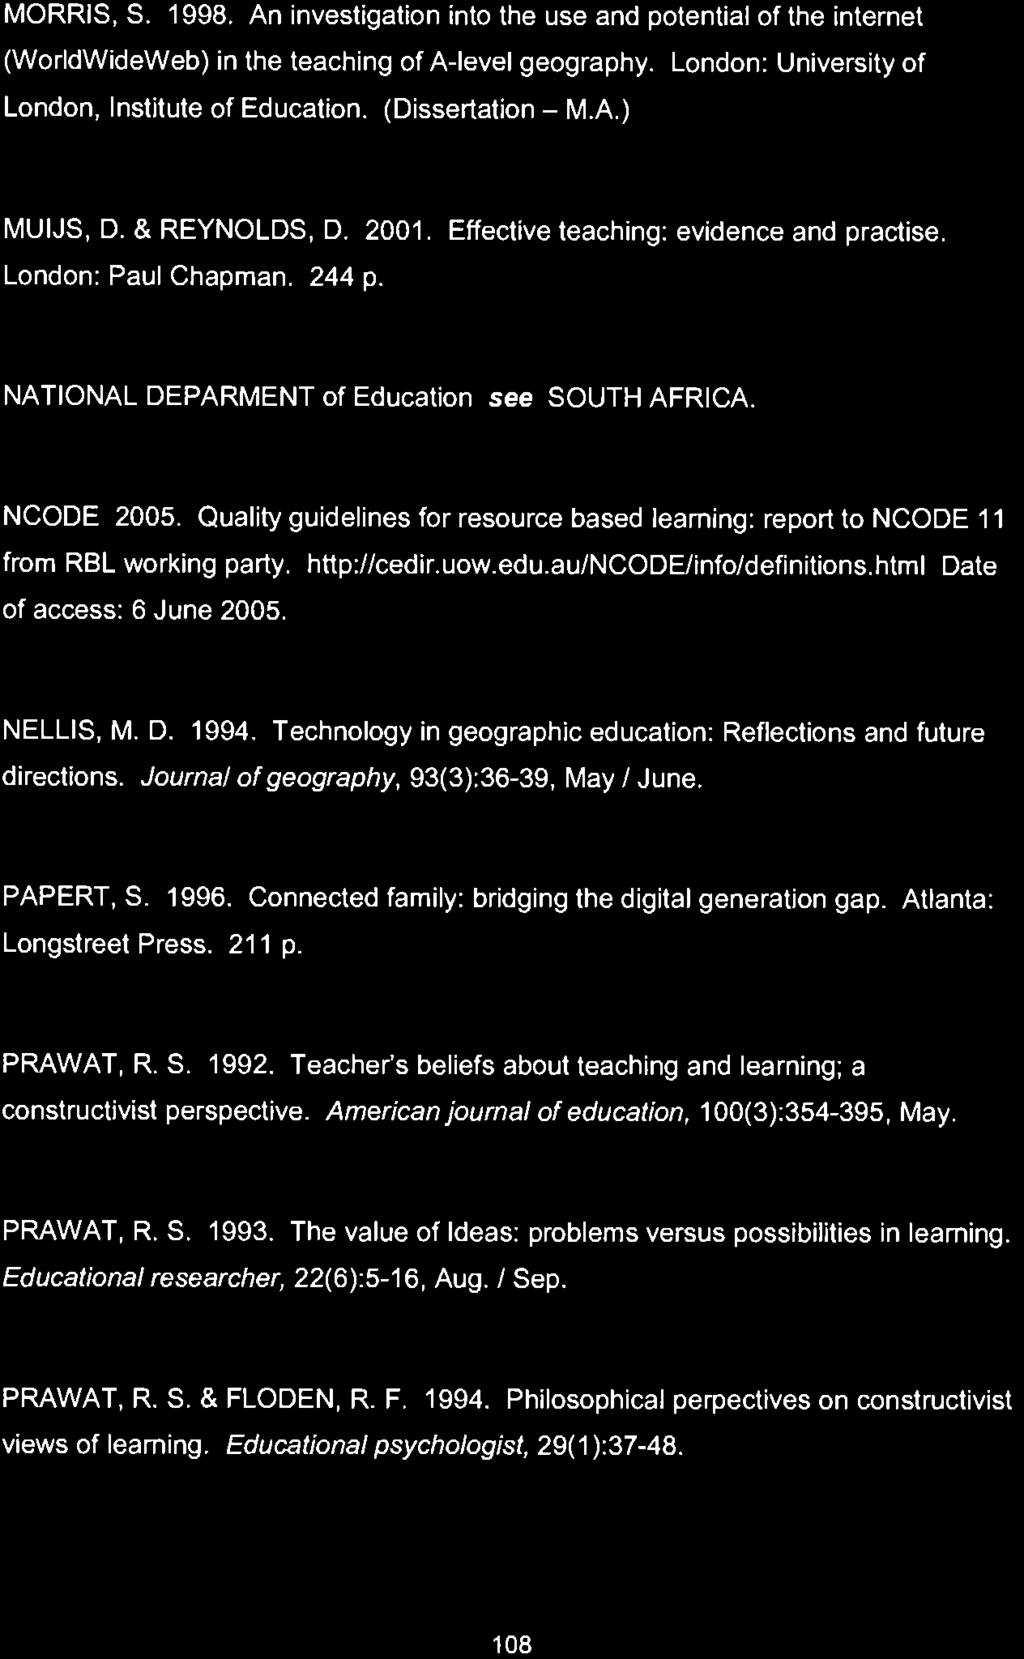 MORRIS, S. 1998. An investigation into the use and potential of the internet (Worldwideweb) in the teaching of A-level geography. London: University of London, Institute of Education.